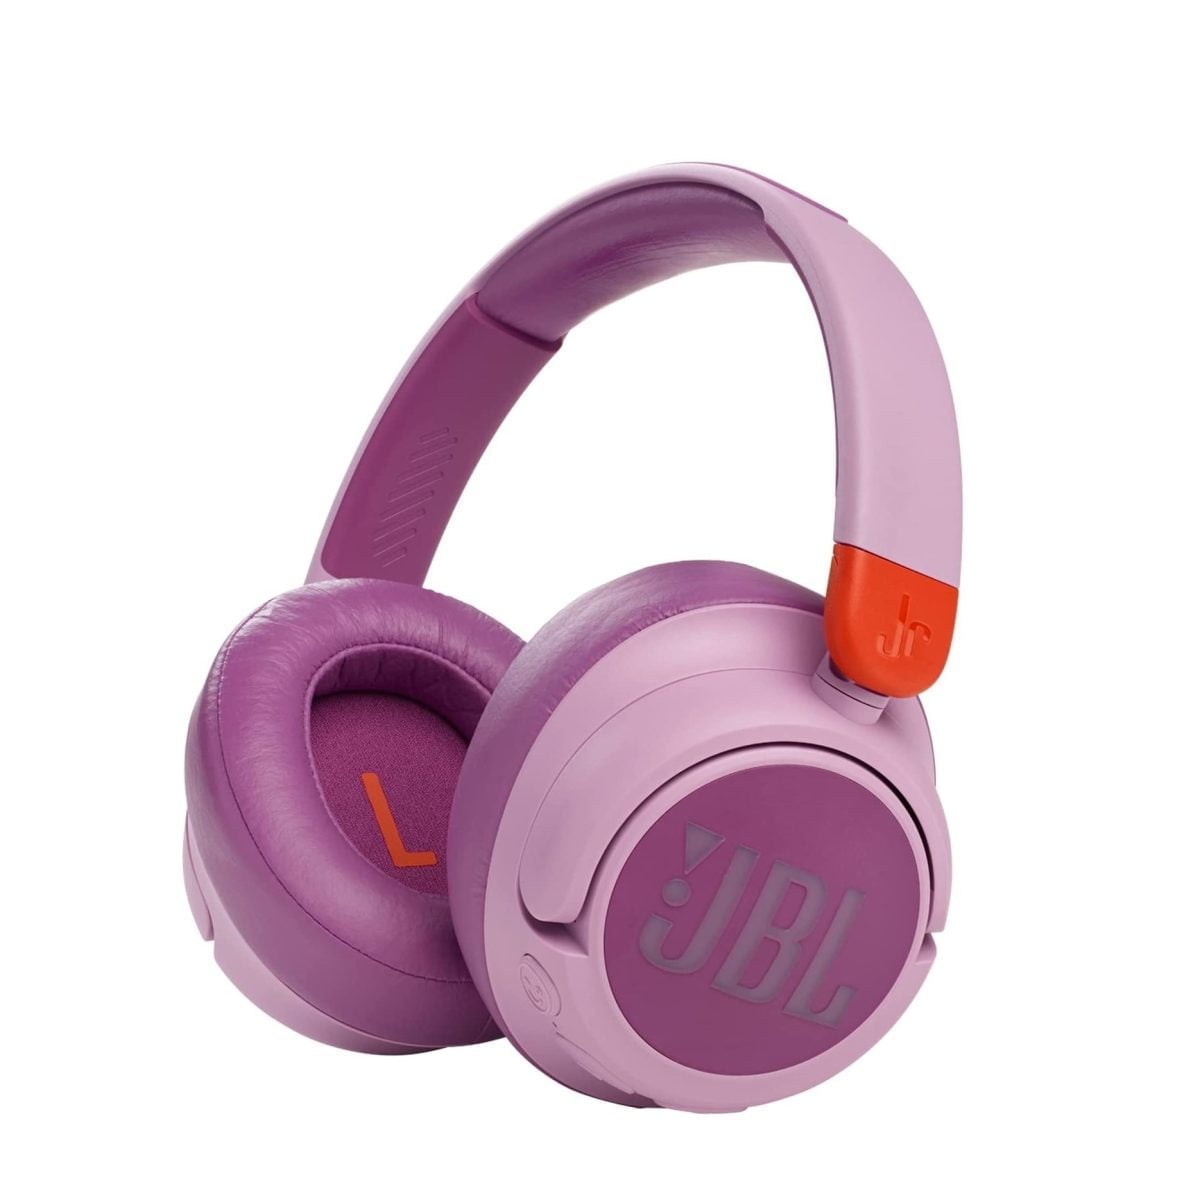 61Esql1Izbl. Ac Sl1500 Jbl &Amp;Lt;H1&Amp;Gt;Jbl Jr460Nc On-Ear Wireless Headphones For Kids, Pink&Amp;Lt;/H1&Amp;Gt;&Amp;Lt;Div Class=&Amp;Quot;Wpview Wpview-Wrap&Amp;Quot; Data-Wpview-Text=&Amp;Quot;Https%3A%2F%2Fwww.youtube.com%2Fwatch%3Fv%3Dmdaicwkv4Pg&Amp;Quot; Data-Wpview-Type=&Amp;Quot;Embedurl&Amp;Quot;&Amp;Gt;&Amp;Lt;Span Class=&Amp;Quot;Mce-Shim&Amp;Quot;&Amp;Gt;&Amp;Lt;/Span&Amp;Gt;&Amp;Lt;Span Class=&Amp;Quot;Wpview-End&Amp;Quot;&Amp;Gt;&Amp;Lt;/Span&Amp;Gt;&Amp;Lt;/Div&Amp;Gt;&Amp;Lt;P&Amp;Gt;Quality Sound Has No Age, But You Want To Be Sure Your Kids Are Safe While Having Fun. With A Maximum Volume Set Under 85Db, They’re Free To Enjoy Jbl Quality Sound, Safely. Shut Out All That Noise And Distraction With Active Noise Cancelling. Your Kids Can Stay Focused Whether They’re Listening To Music, Enjoying Their Favorite Show Or Learning Online. Help Your Kids Stay Connected To The World With The Built-In Mic. They Can Chat Easily With Friends And Family During Downtime, Or Teachers While They’re Busy Learning.&Amp;Lt;/P&Amp;Gt; Jbl Headphone Jbl Jr460Nc Wireless Over-Ear Noise Cancelling Kids Headphones - Pink